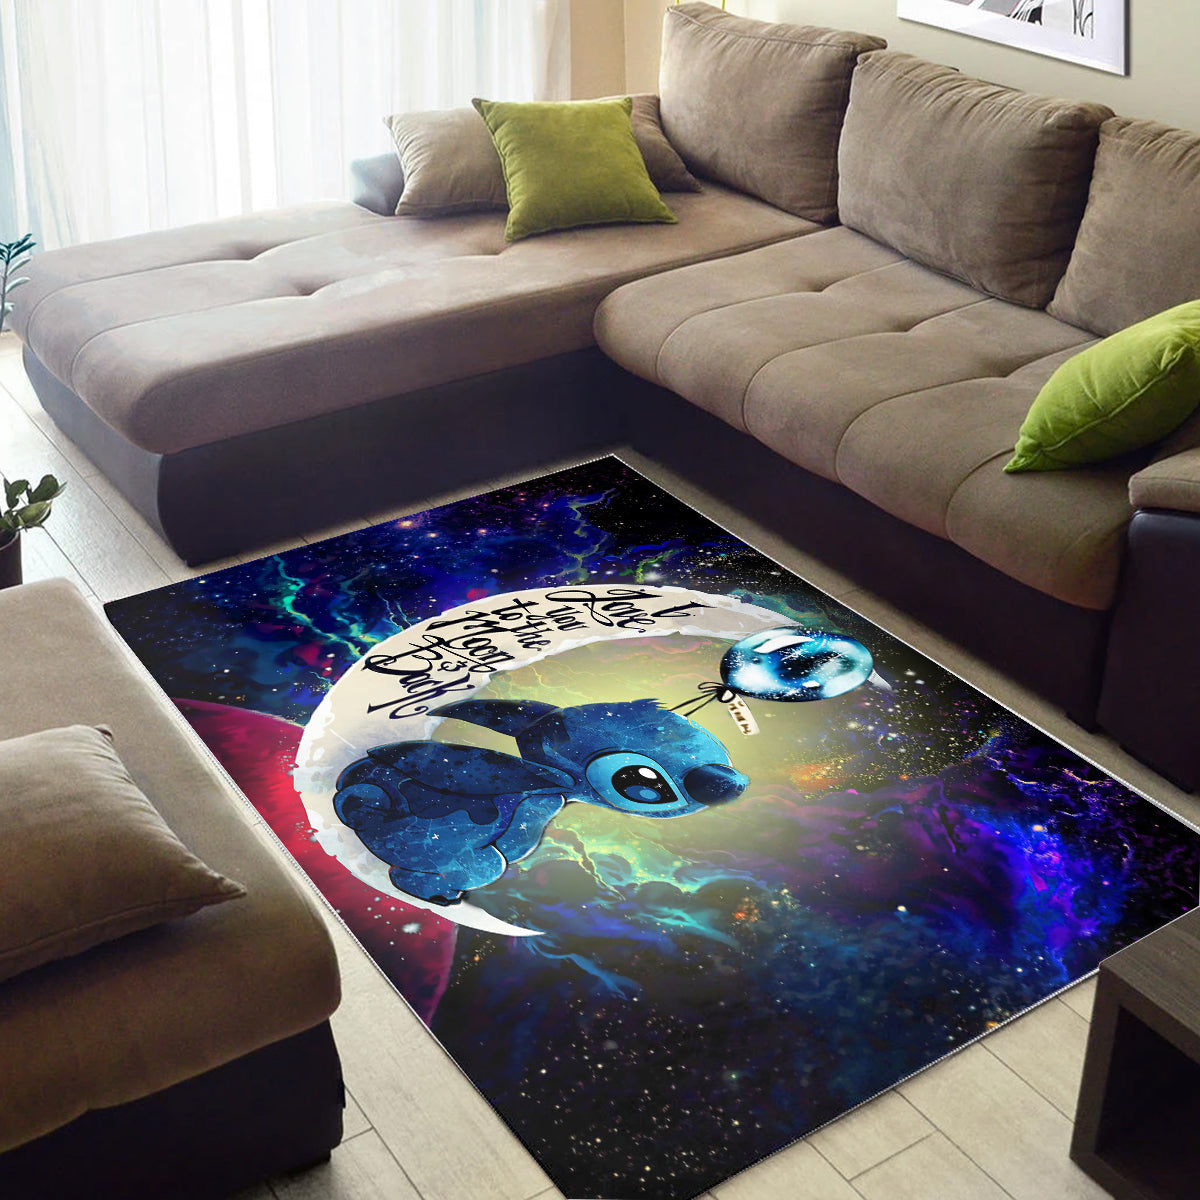 Stitch Love You To The Moon Galaxy Carpet Rug Home Room Decor